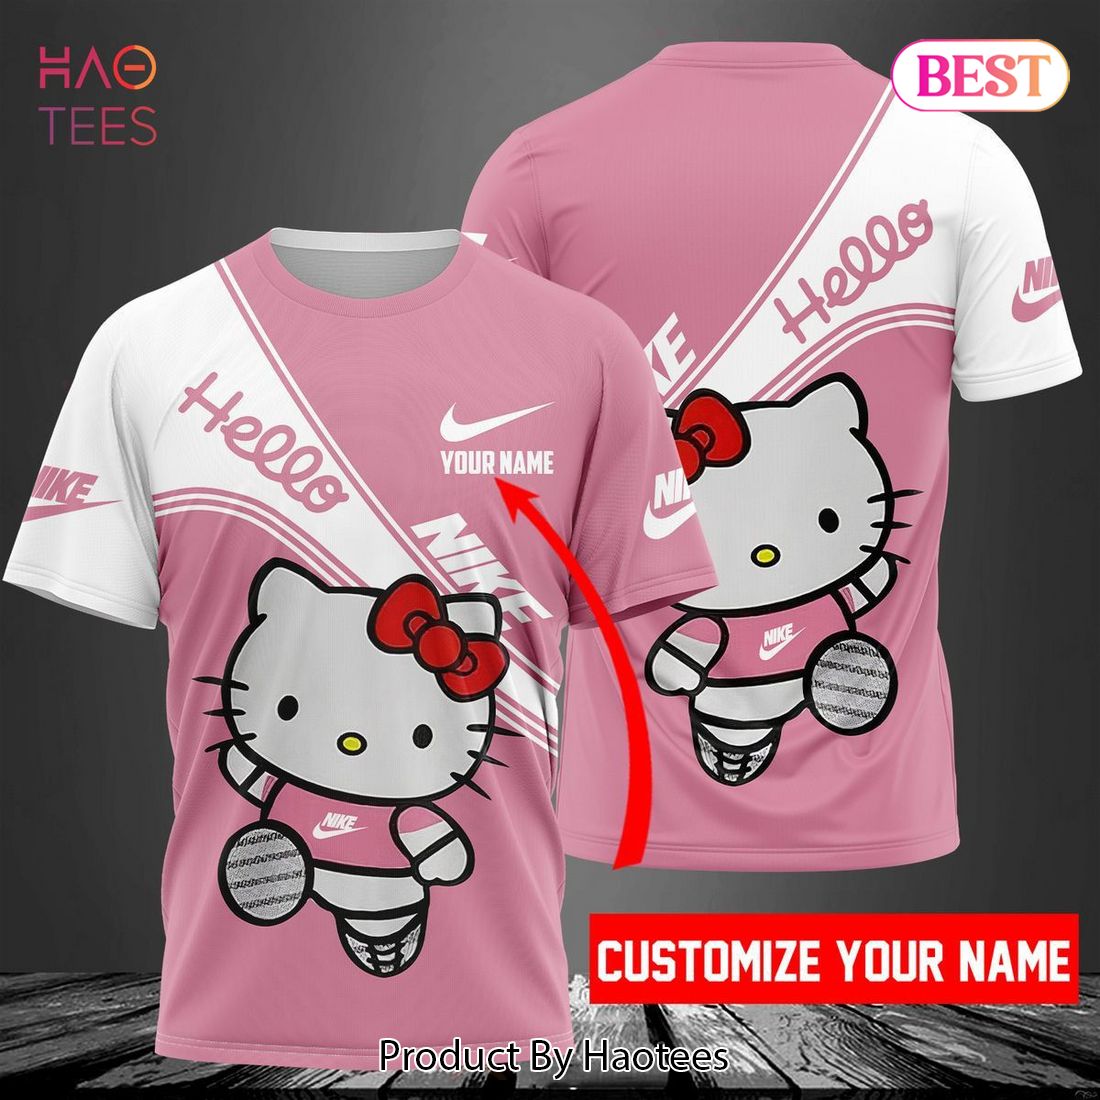 HOT Hello Kitty Nike Luxury Brand 3D T-Shirt Limited Edition